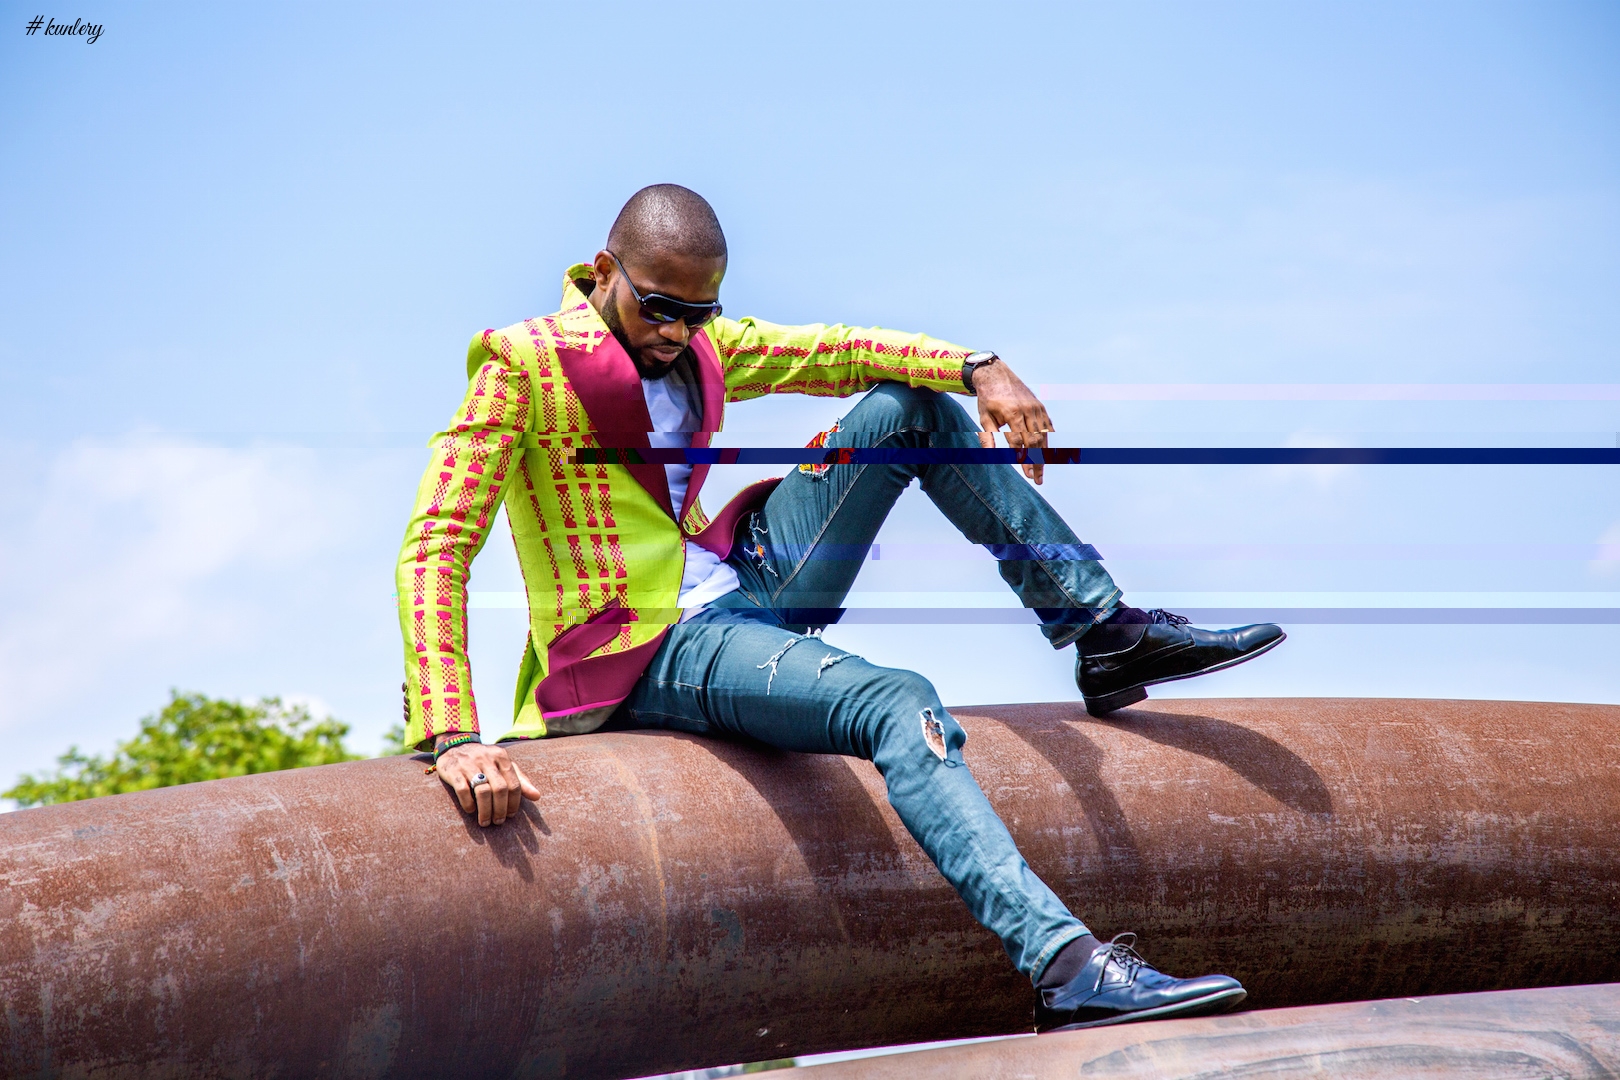 Tesslo Concepts Unveils Exciting Menswear Collection ‘Billboard’